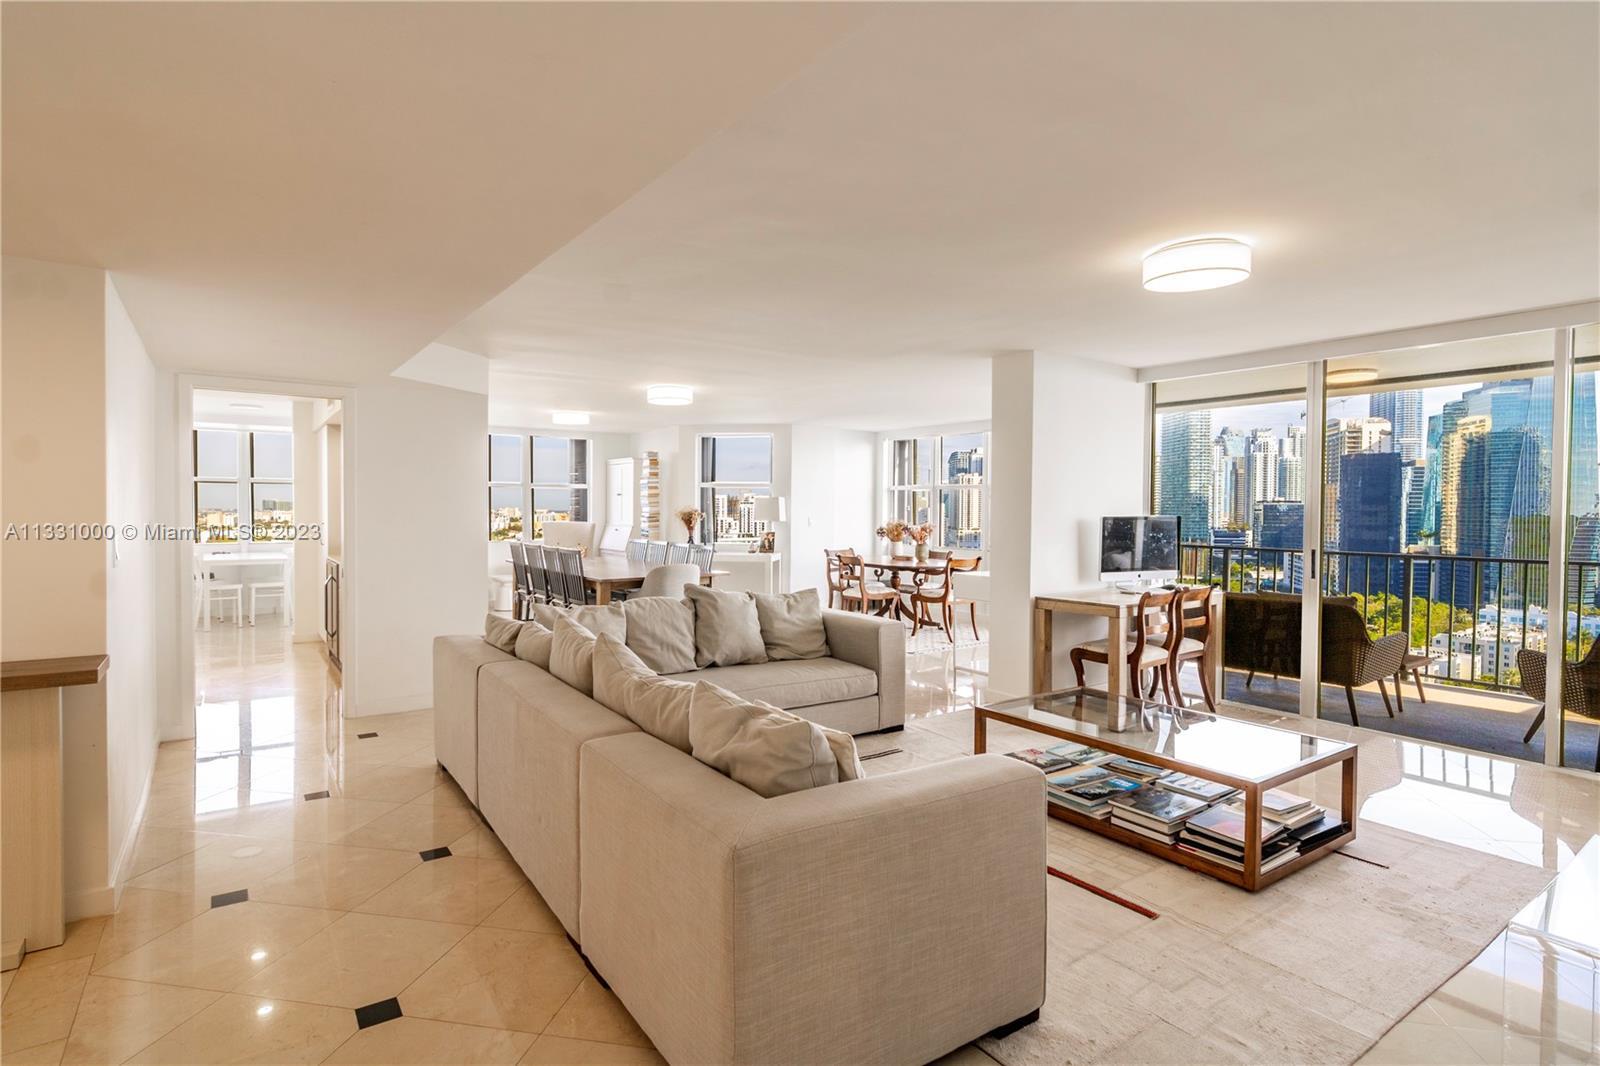 Stunning oversized 4 bedroom home in the sky, with panoramic views of the Biscayne Bay and Brickell 